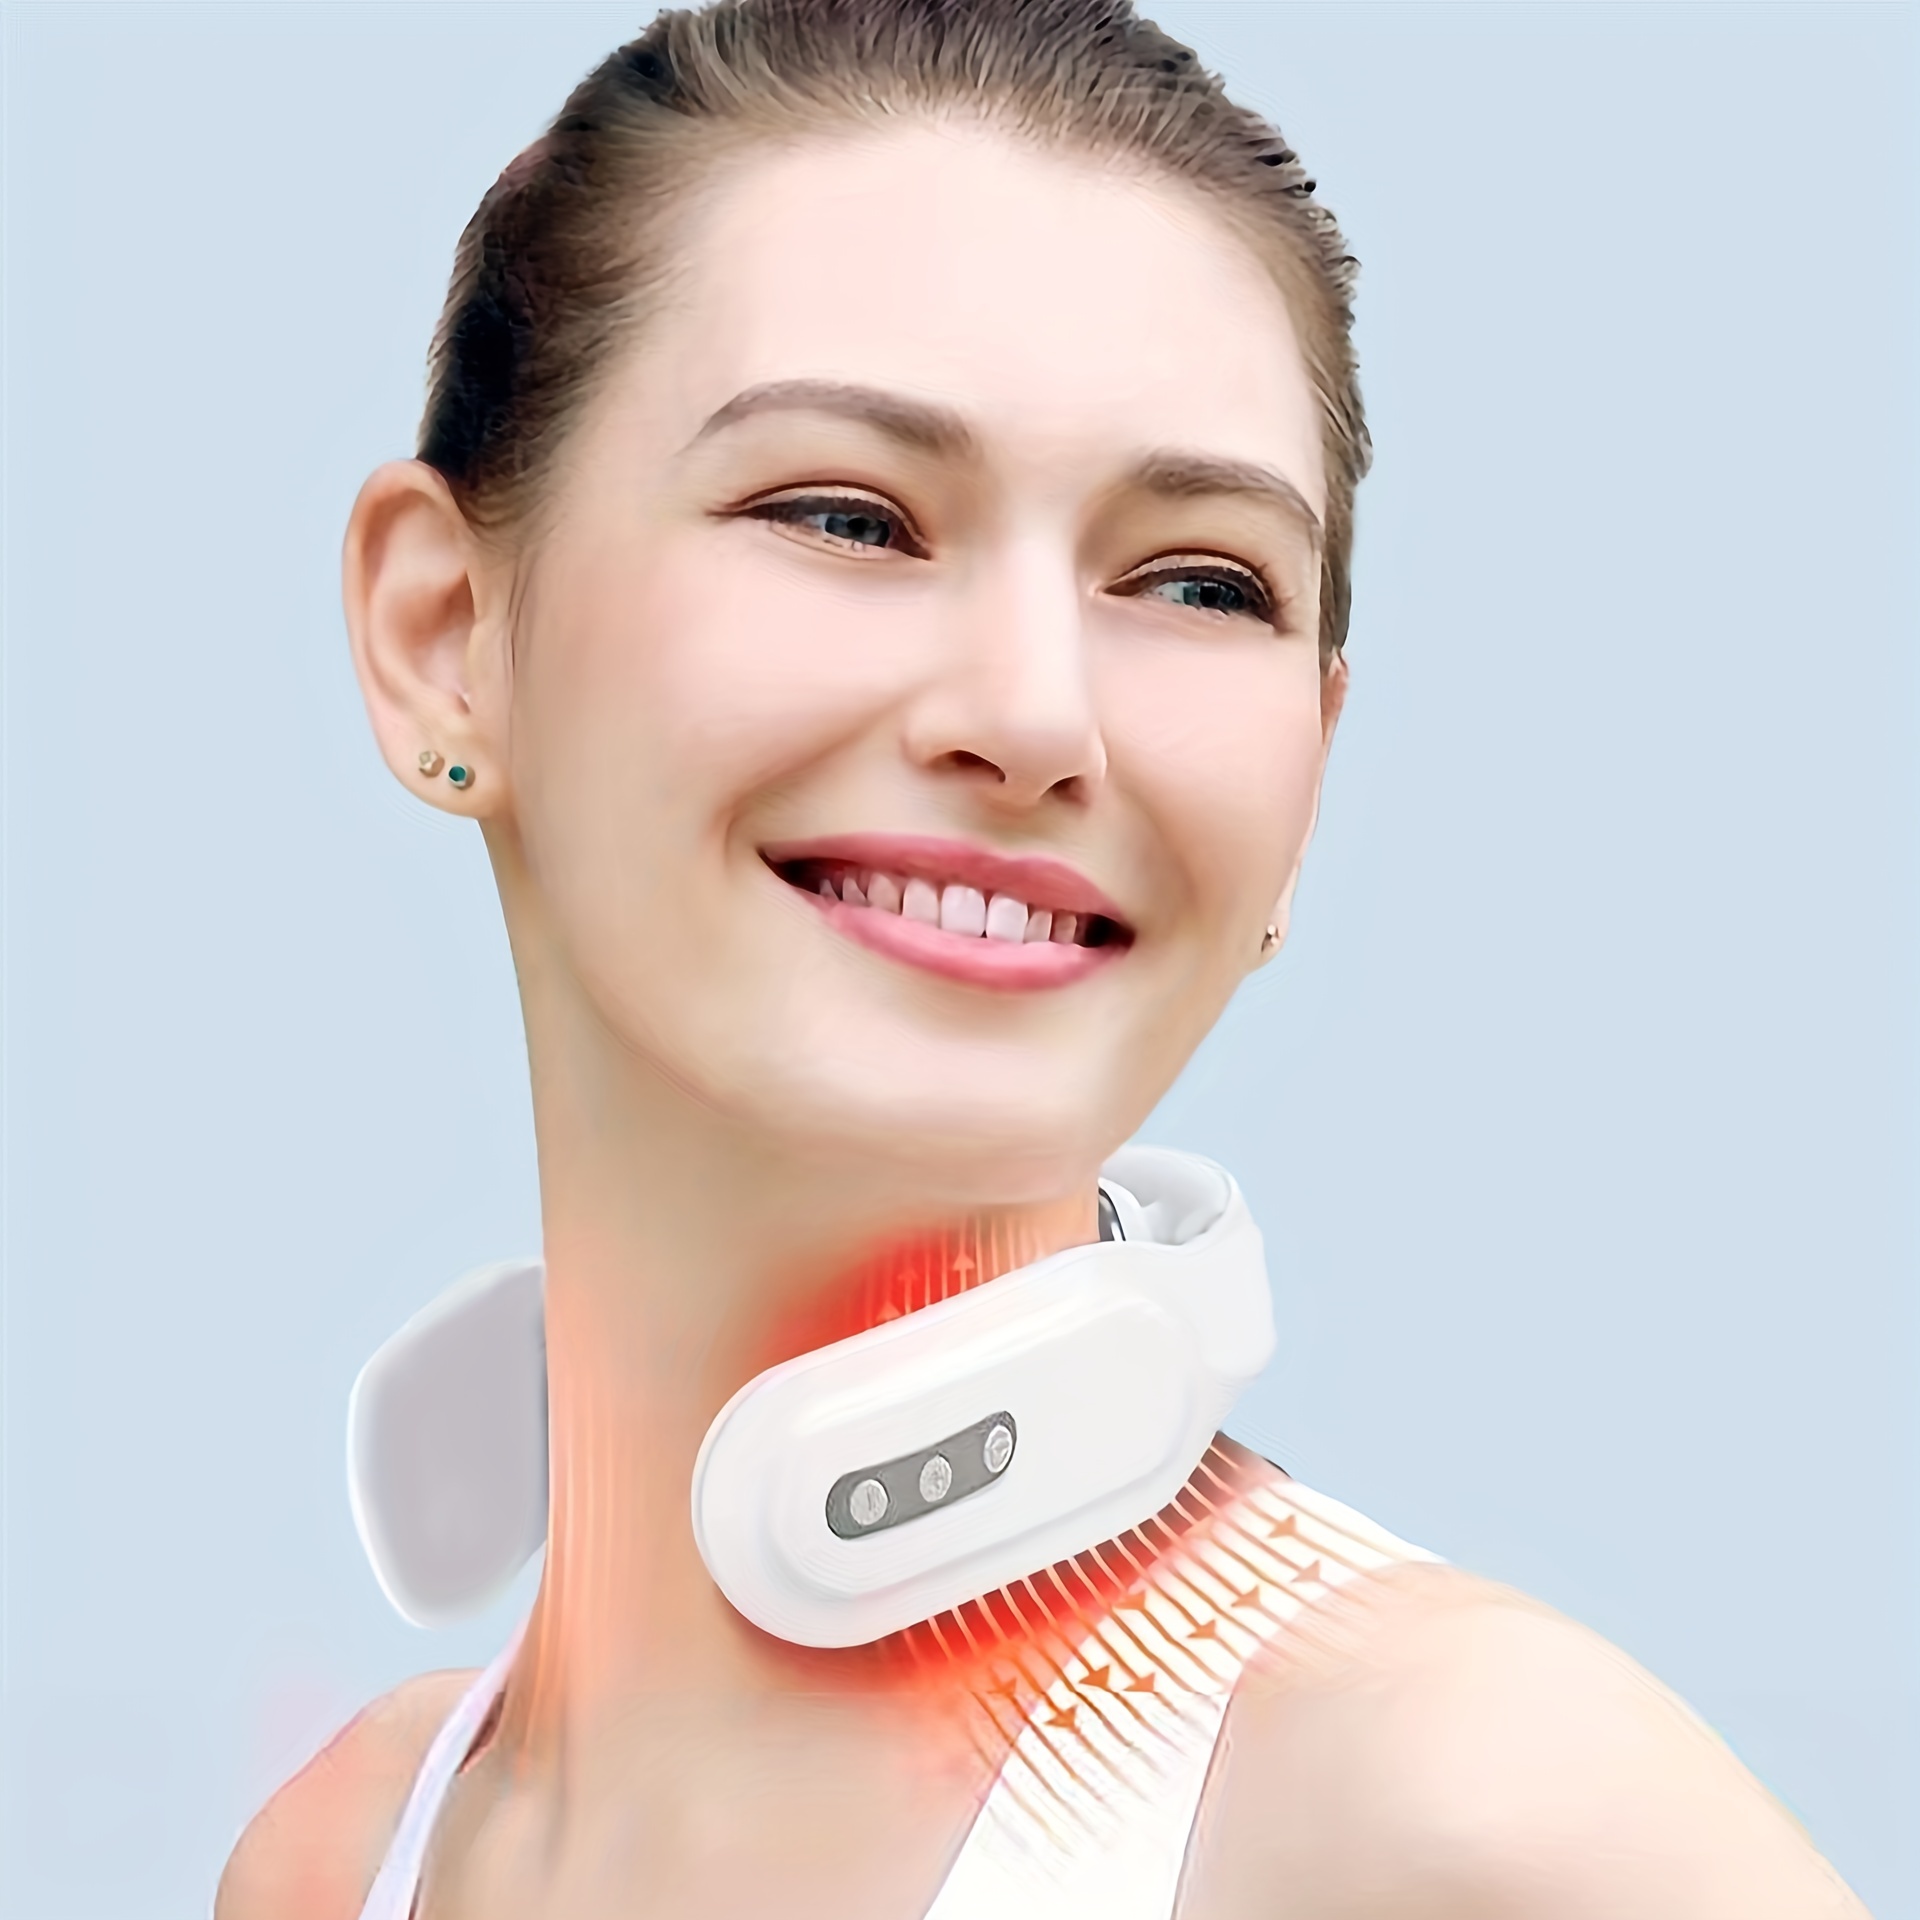 Neck Massager with Heat Cordless Deep Tissue Neck Massager for Pain Relief  Portable Electric Pulse Shoulder Massager with 12 Levels Smart Heated Neck